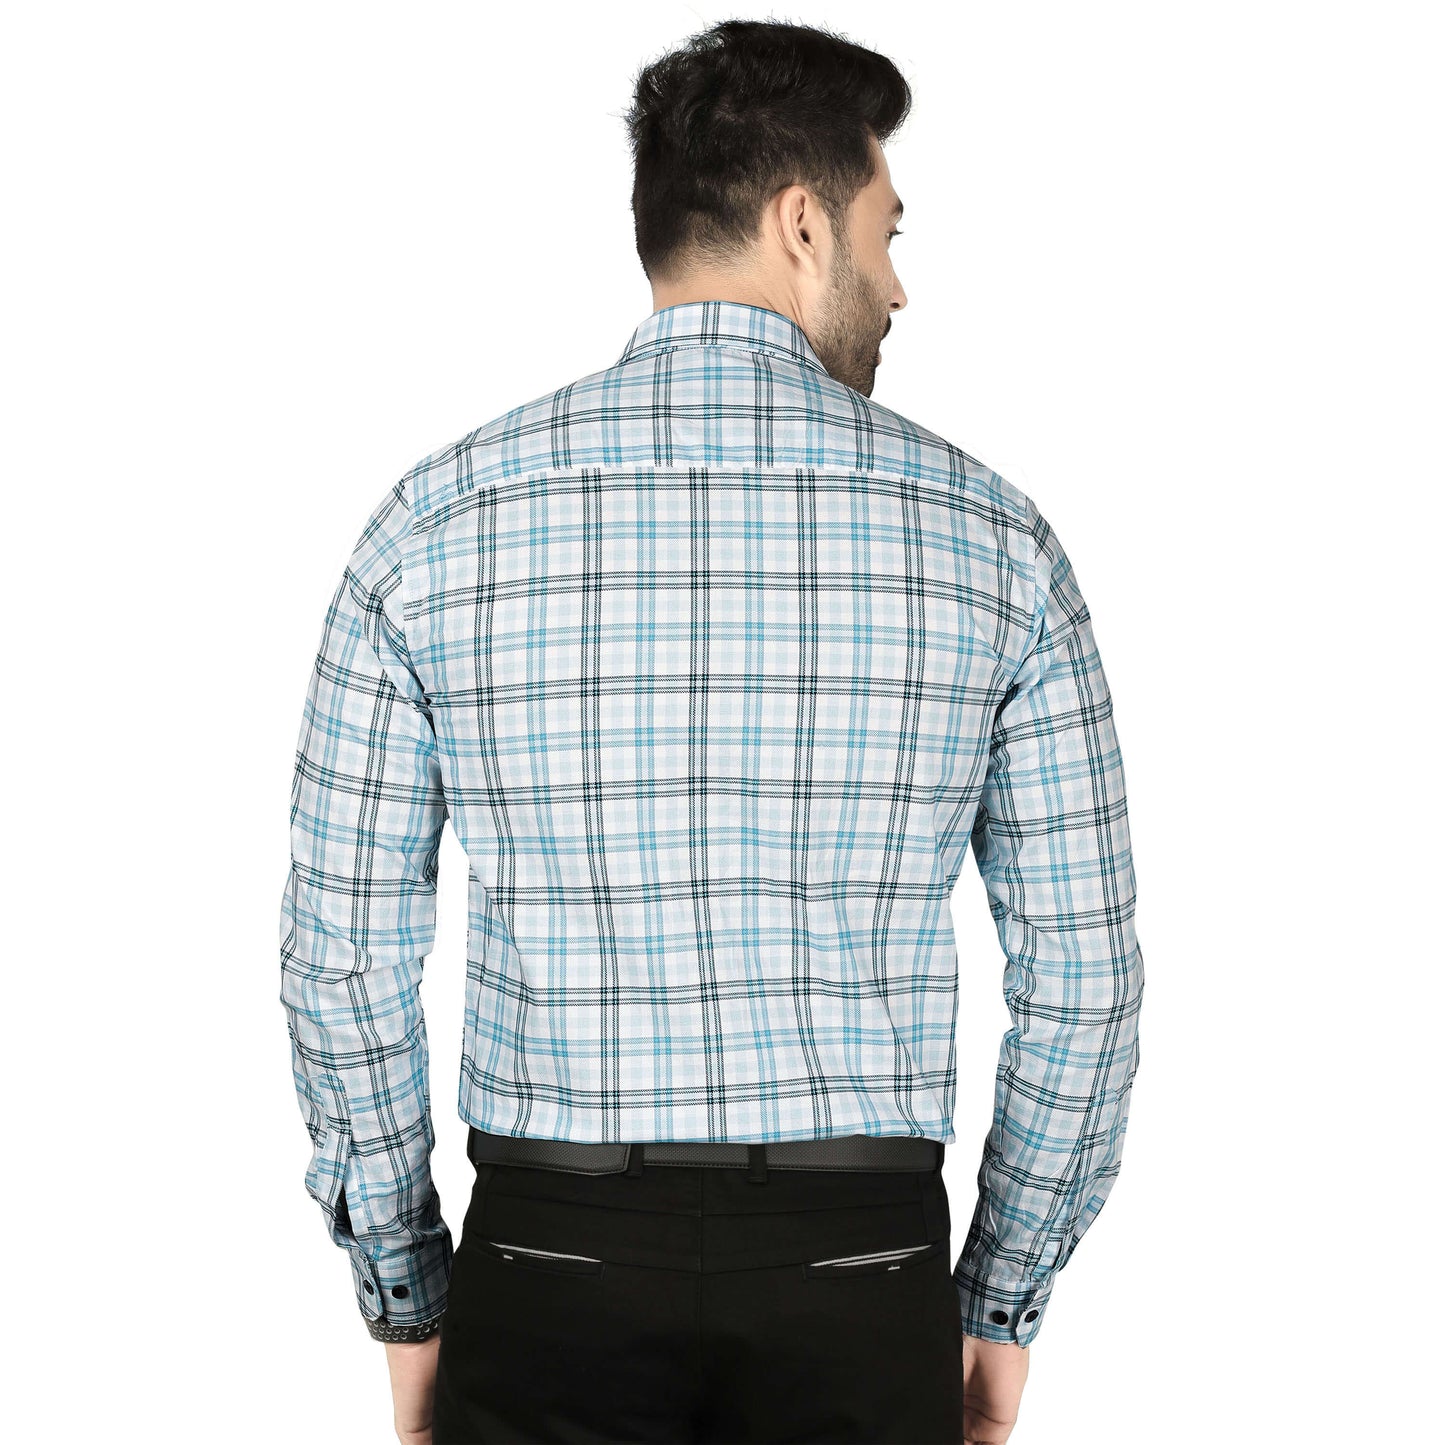 5thanfold Men's Formal Pure Cotton Full Sleeve Checkered Sky blue Slim Fit Shirt